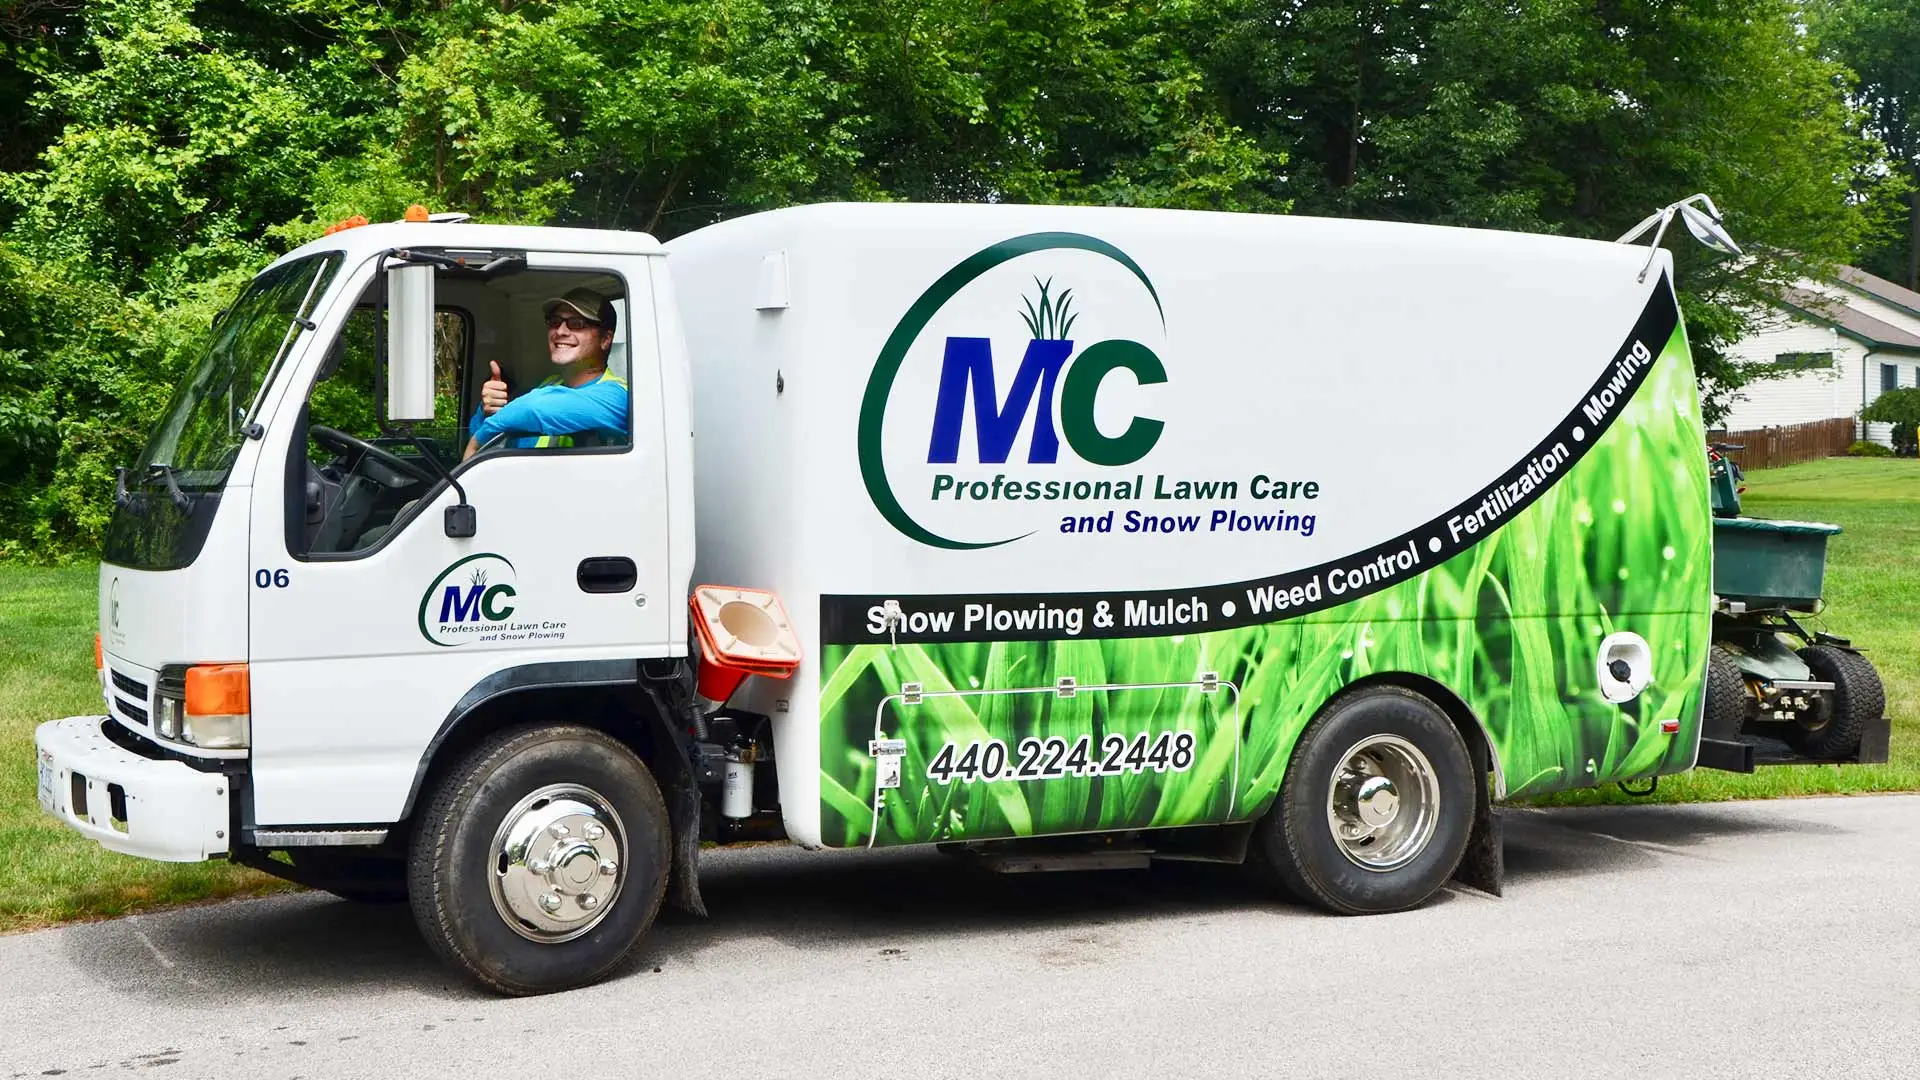 MC Professional Lawn Care and Snow Plowing worker giving thumbs up in service truck near Madison, OH.